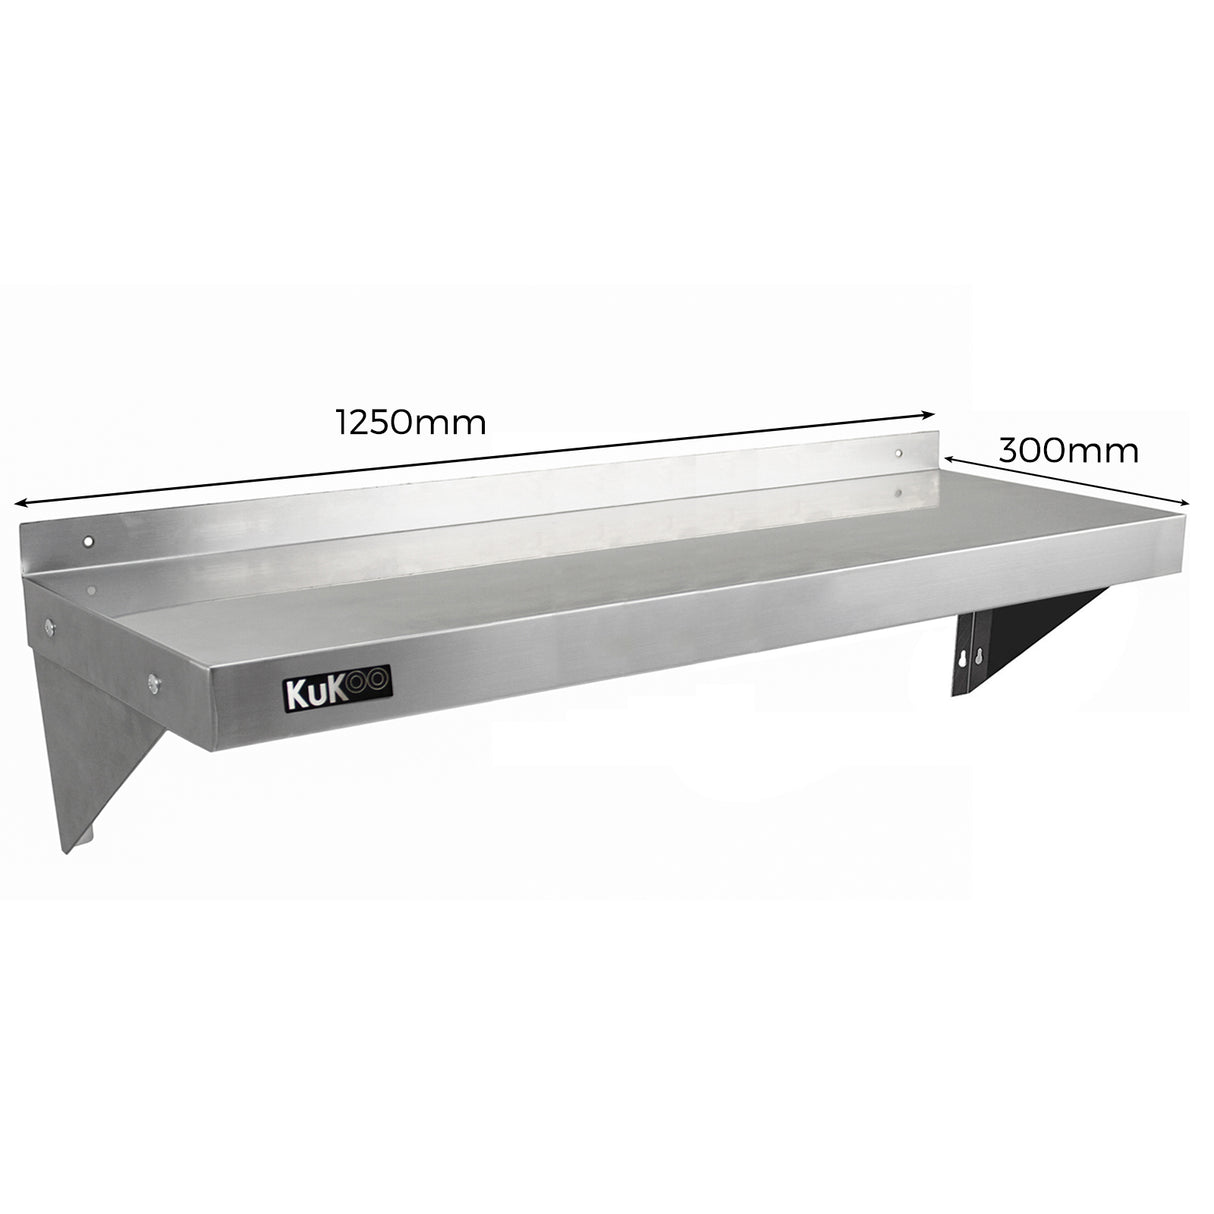 2 x KuKoo Stainless Steel Shelves 1250mm x 300mm